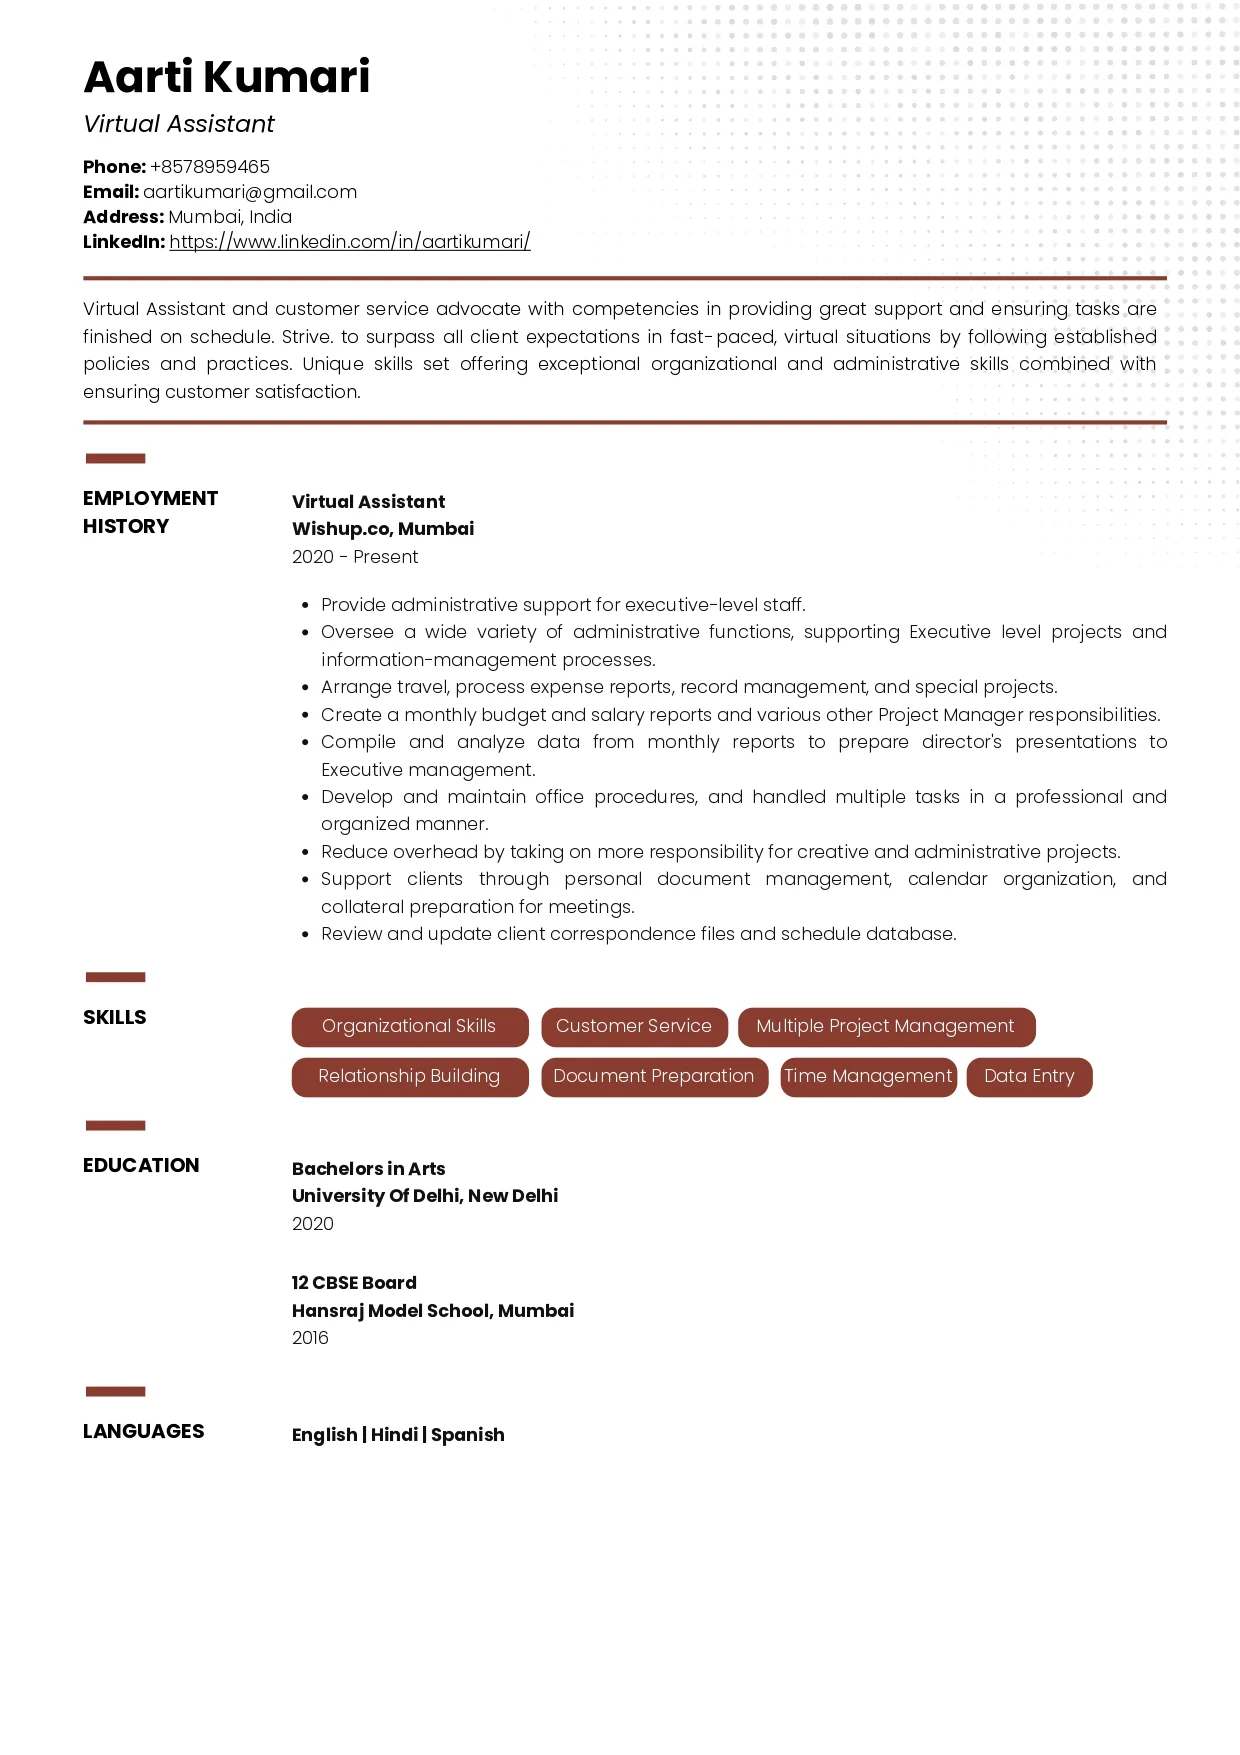 Sample Resume of Virtual Assistant | Free Resume Templates & Samples on Resumod.co